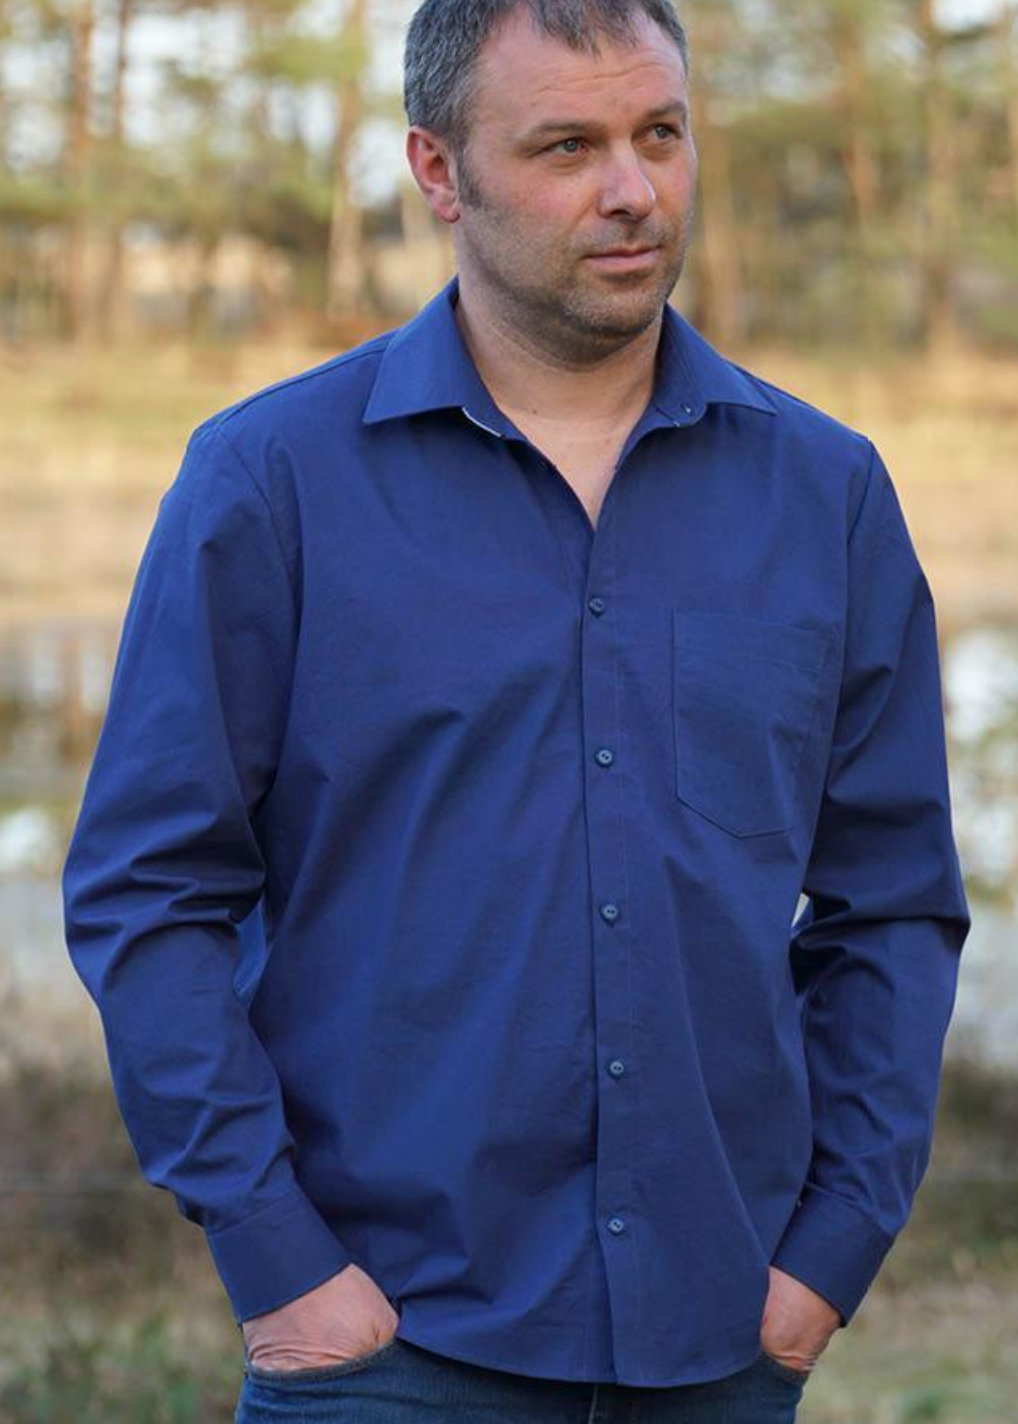 Man wearing the Men's Jensen Shirt sewing pattern from Wardrobe by Me on The Fold Line. A shirt pattern made in cotton, linen or silk fabrics, featuring a classic relaxed-fitting button-front shirt, with yoke, collar and stand, plus curved high low hem.